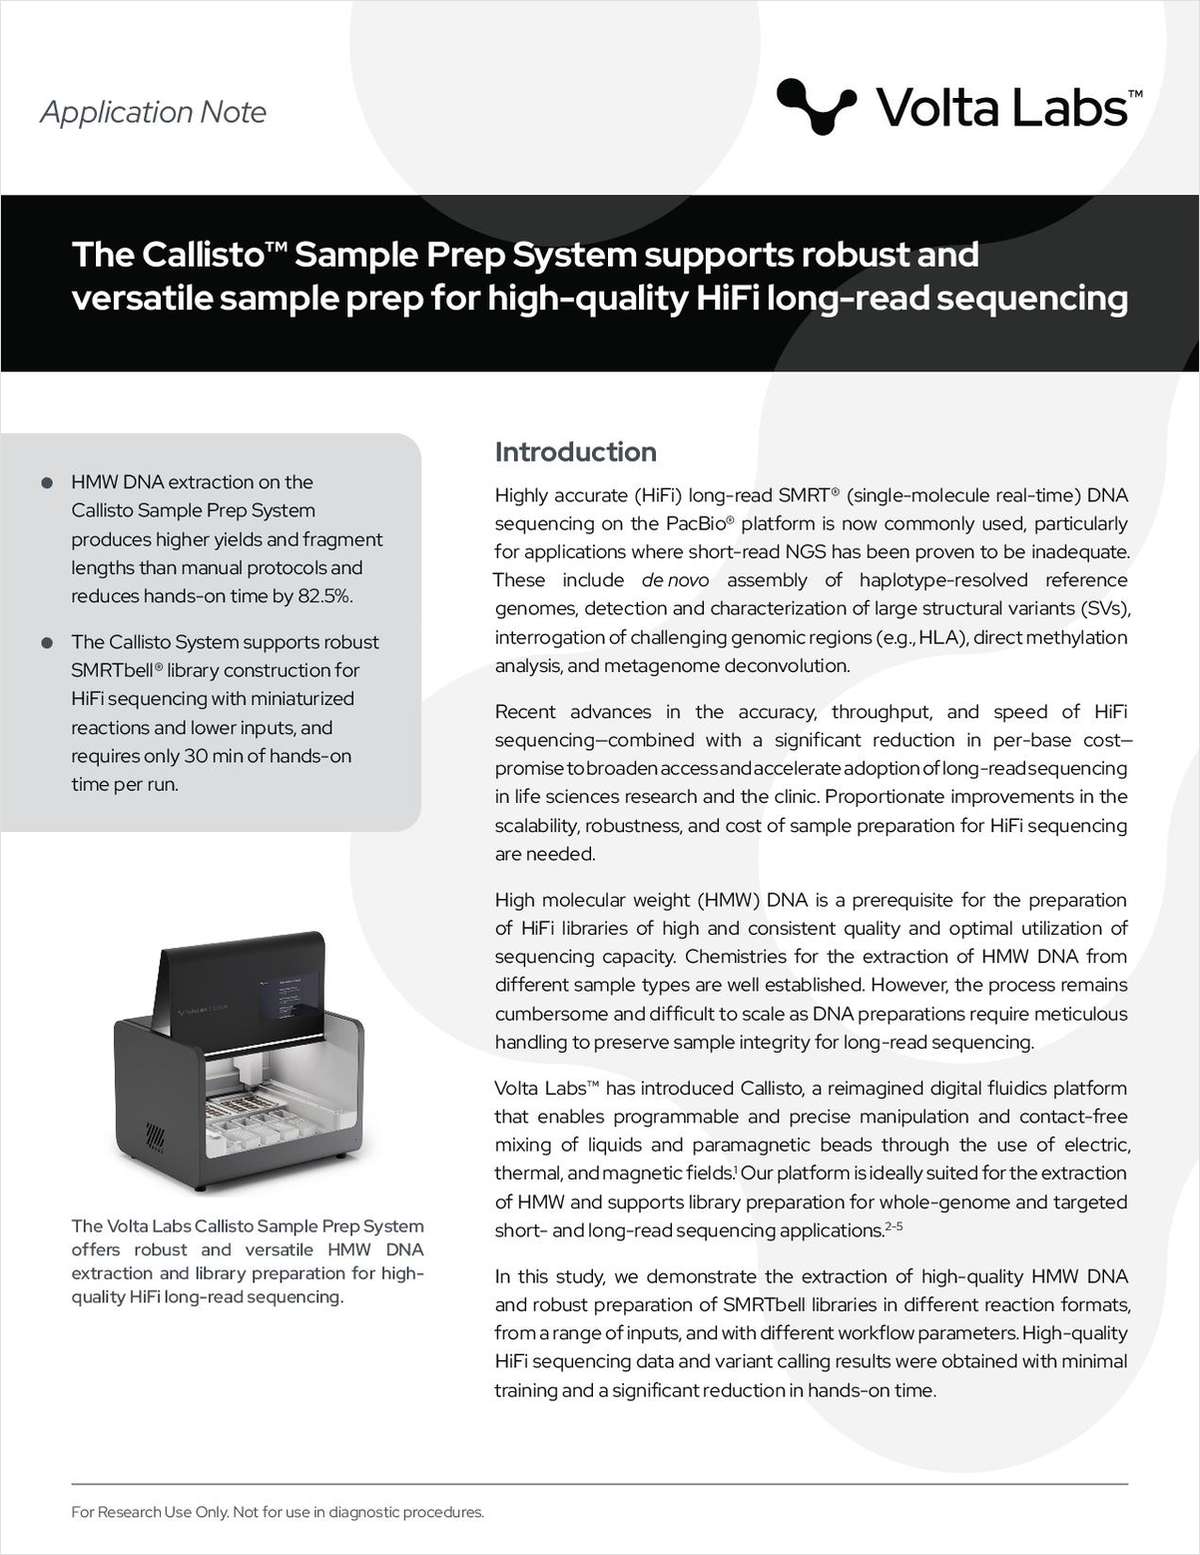 The Callisto Sample Prep System Supports Robust and Versatile Sample Prep for High-Quality HiFi Long-Read Sequencing